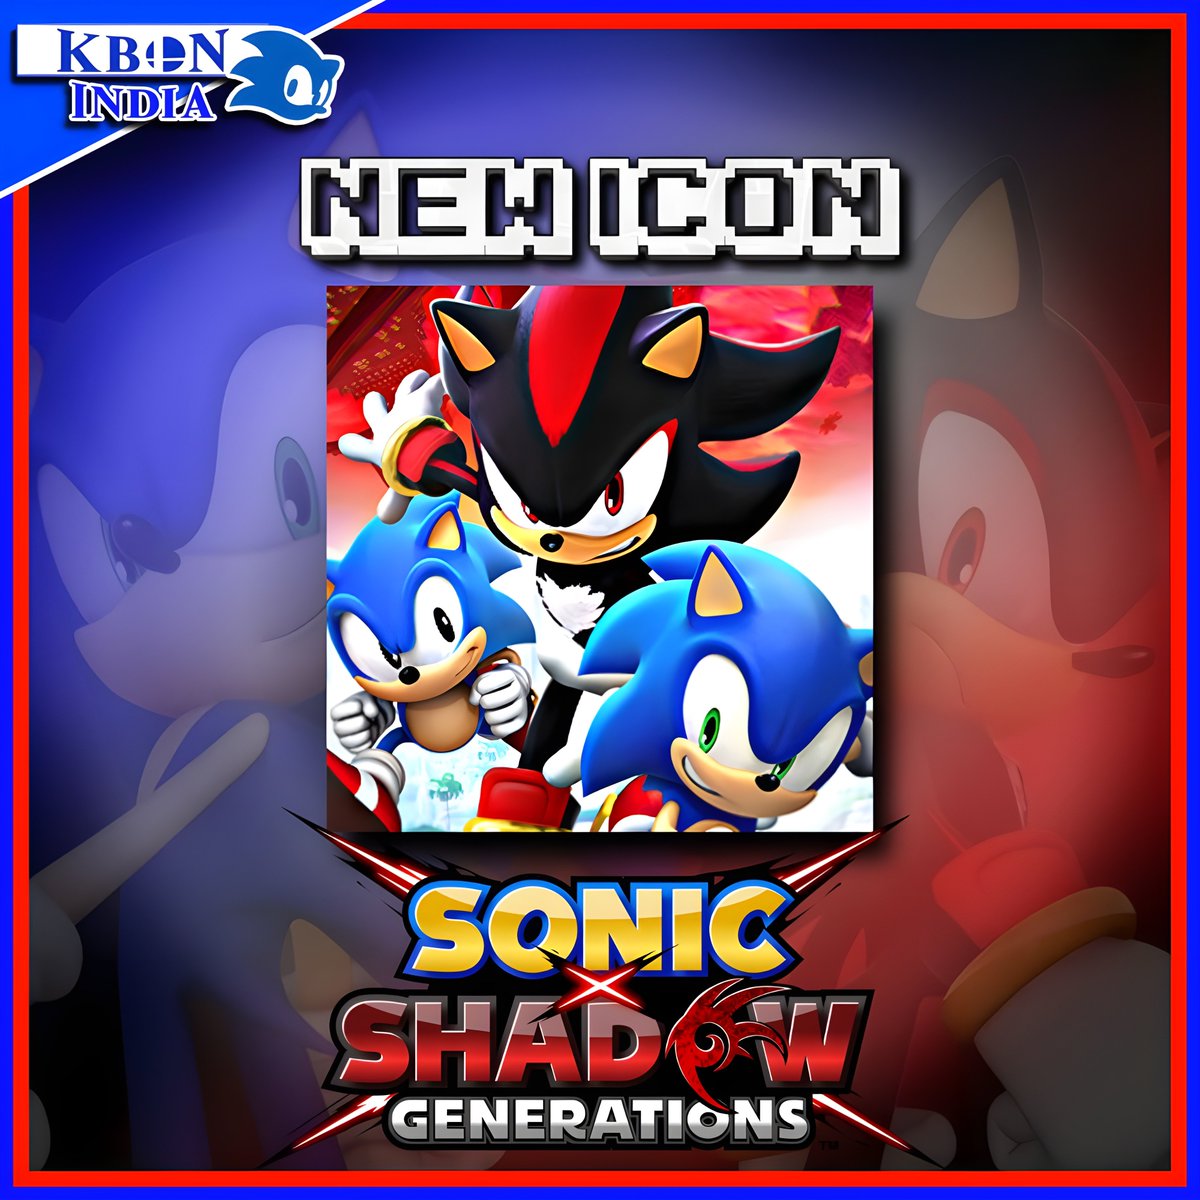 An icon for Sonic X Shadow Generations has been spotted on SteamDB!

#Sonic #SonicTheHedgehog #Shadow #SonicXShadowGenerations #SonicGenerations #SonicSuperstars #SonicNews #KBON